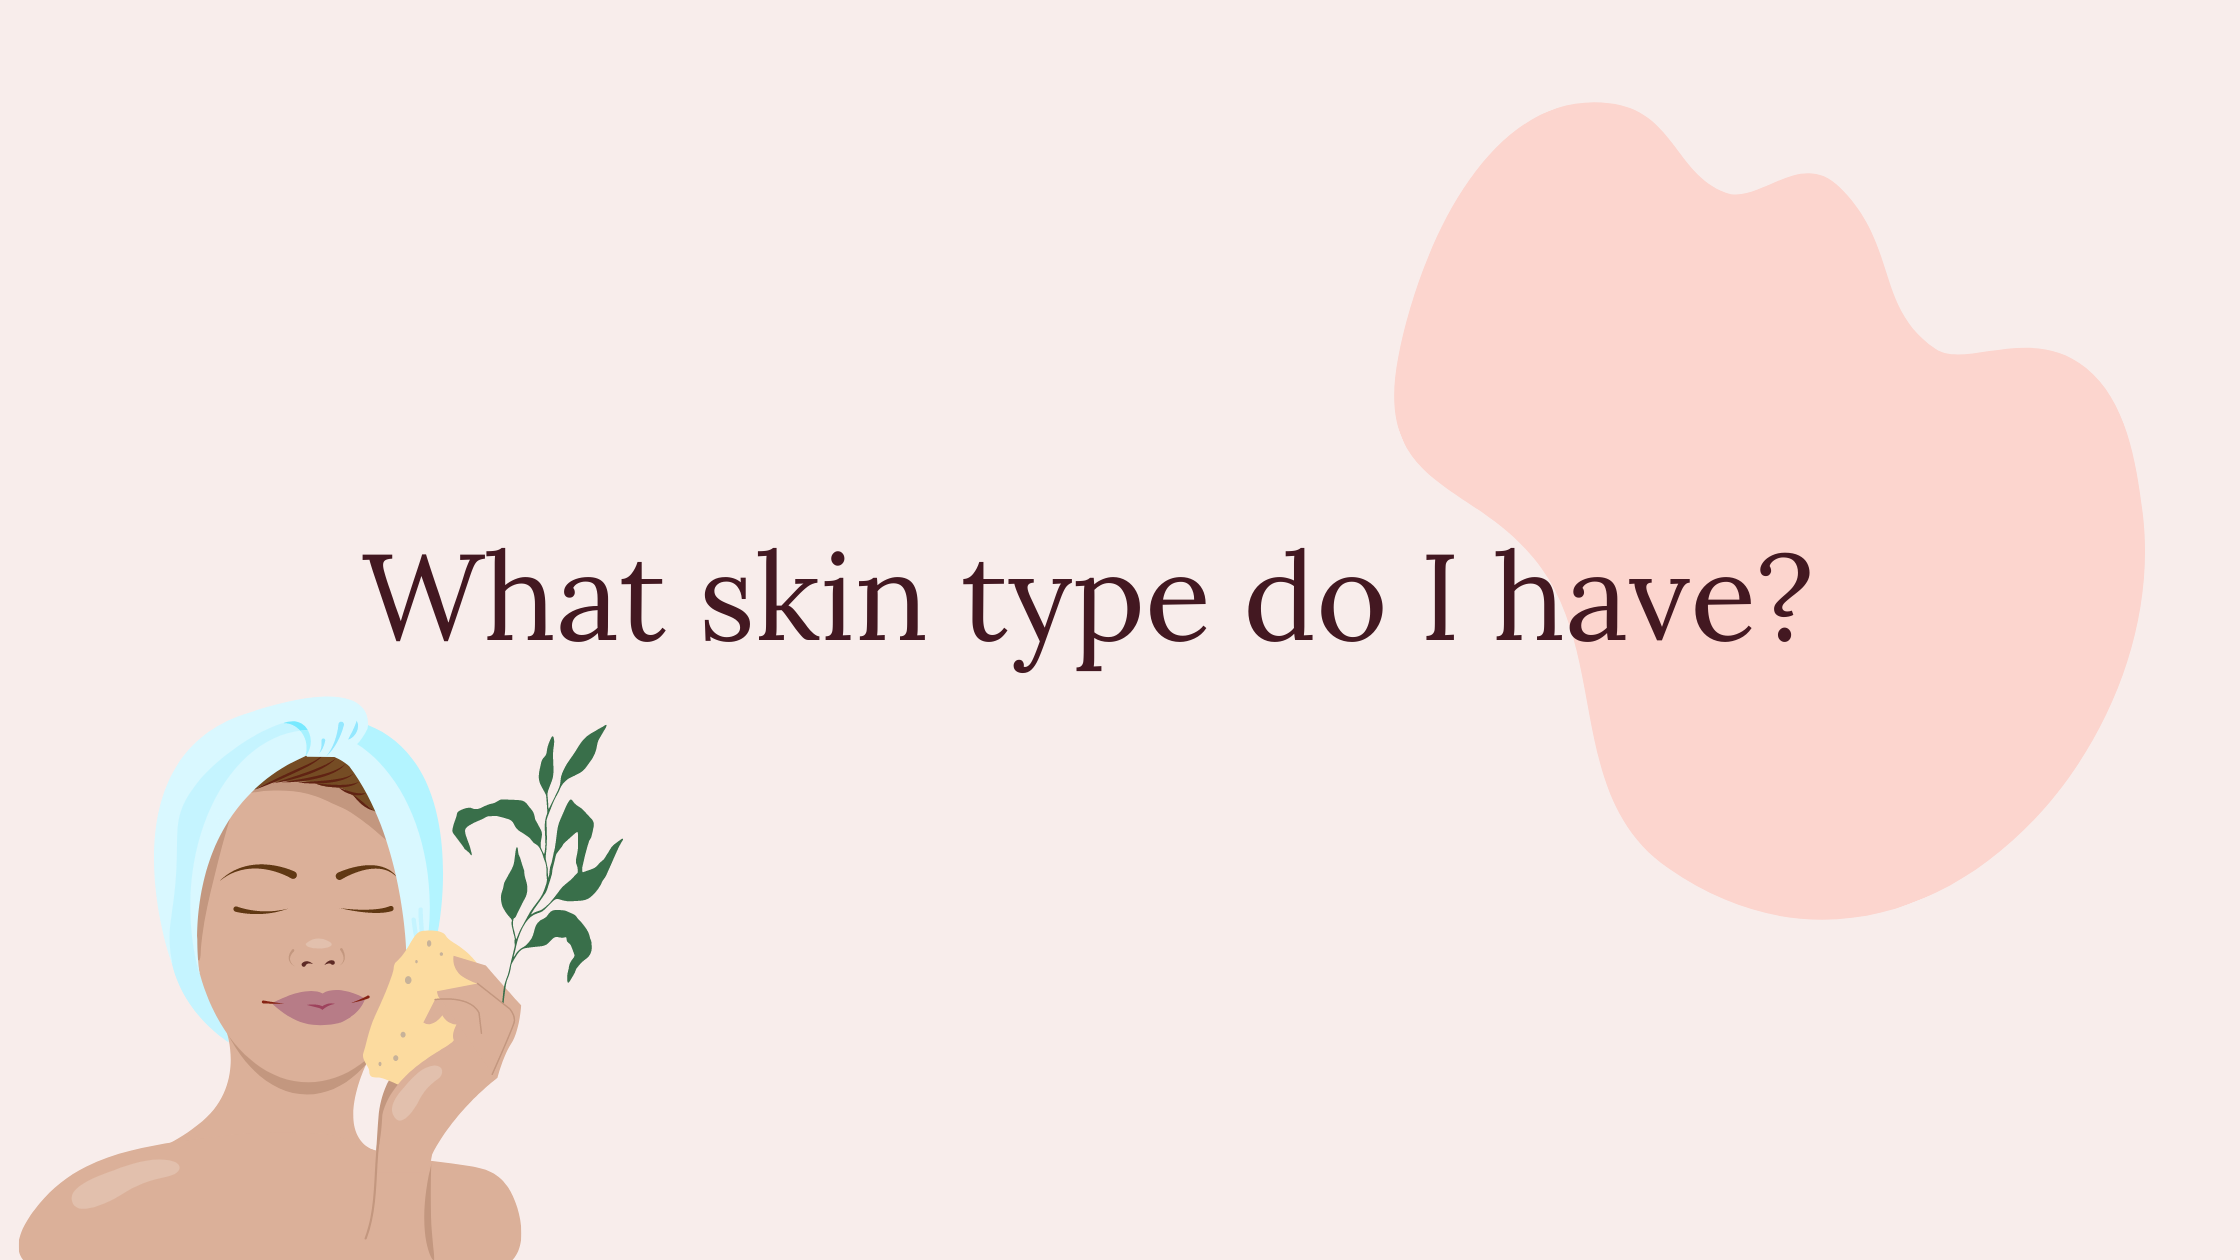 Why skin type do I have? 